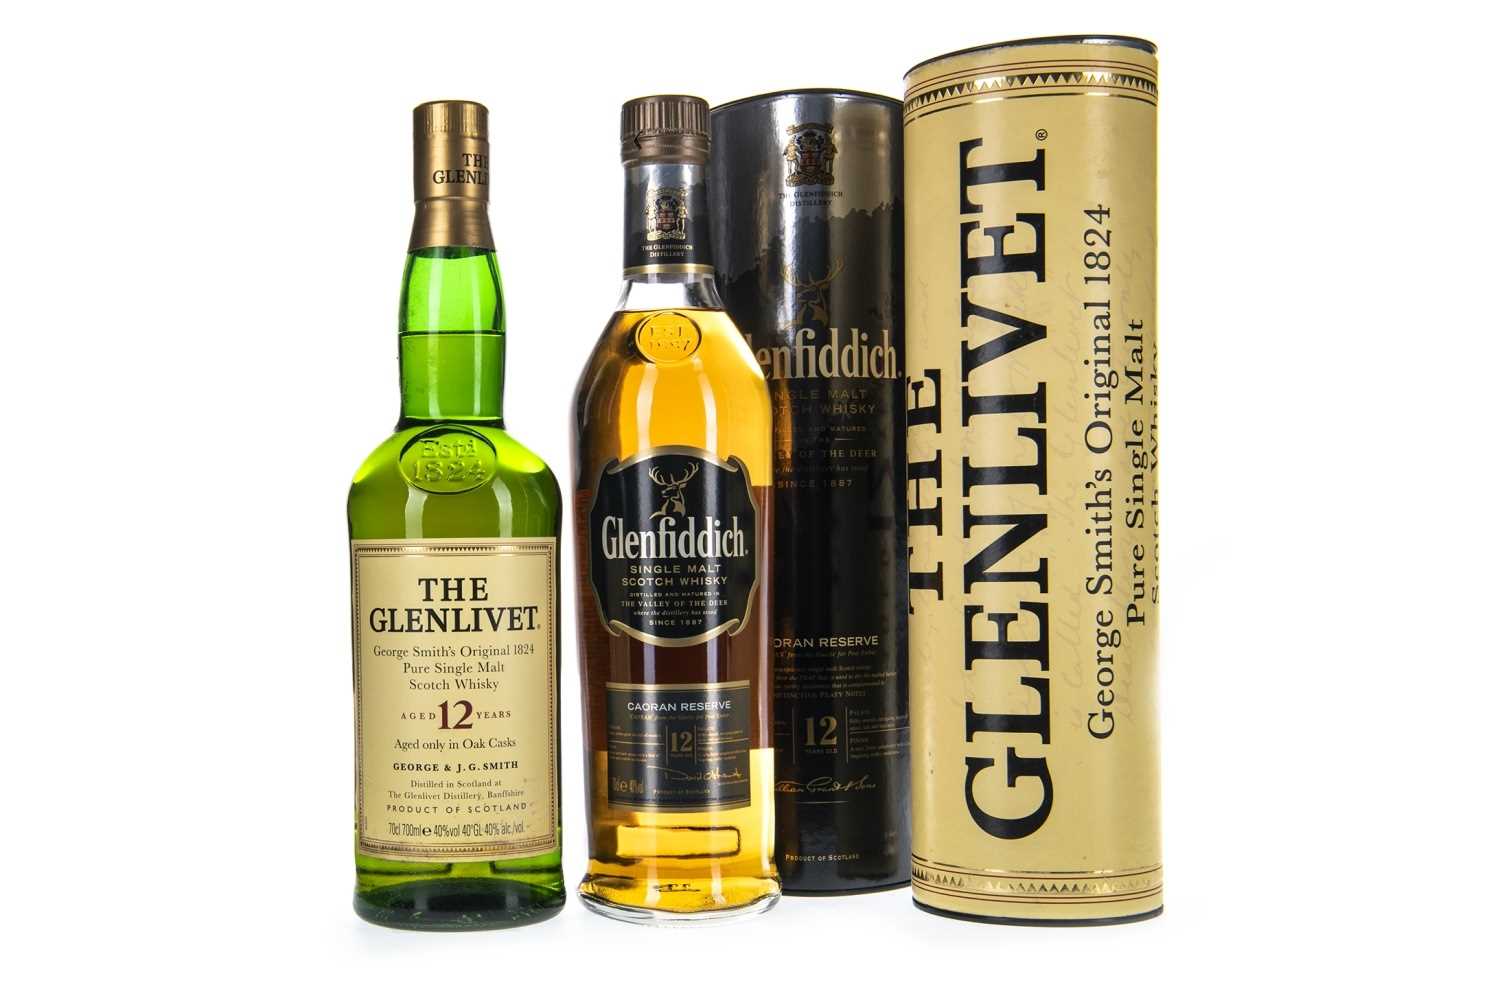 Lot 307 - GLENFIDDICH CAORAN RESERVE AGED 12 YEARS AND GLENLIVET AGED 12 YEARS